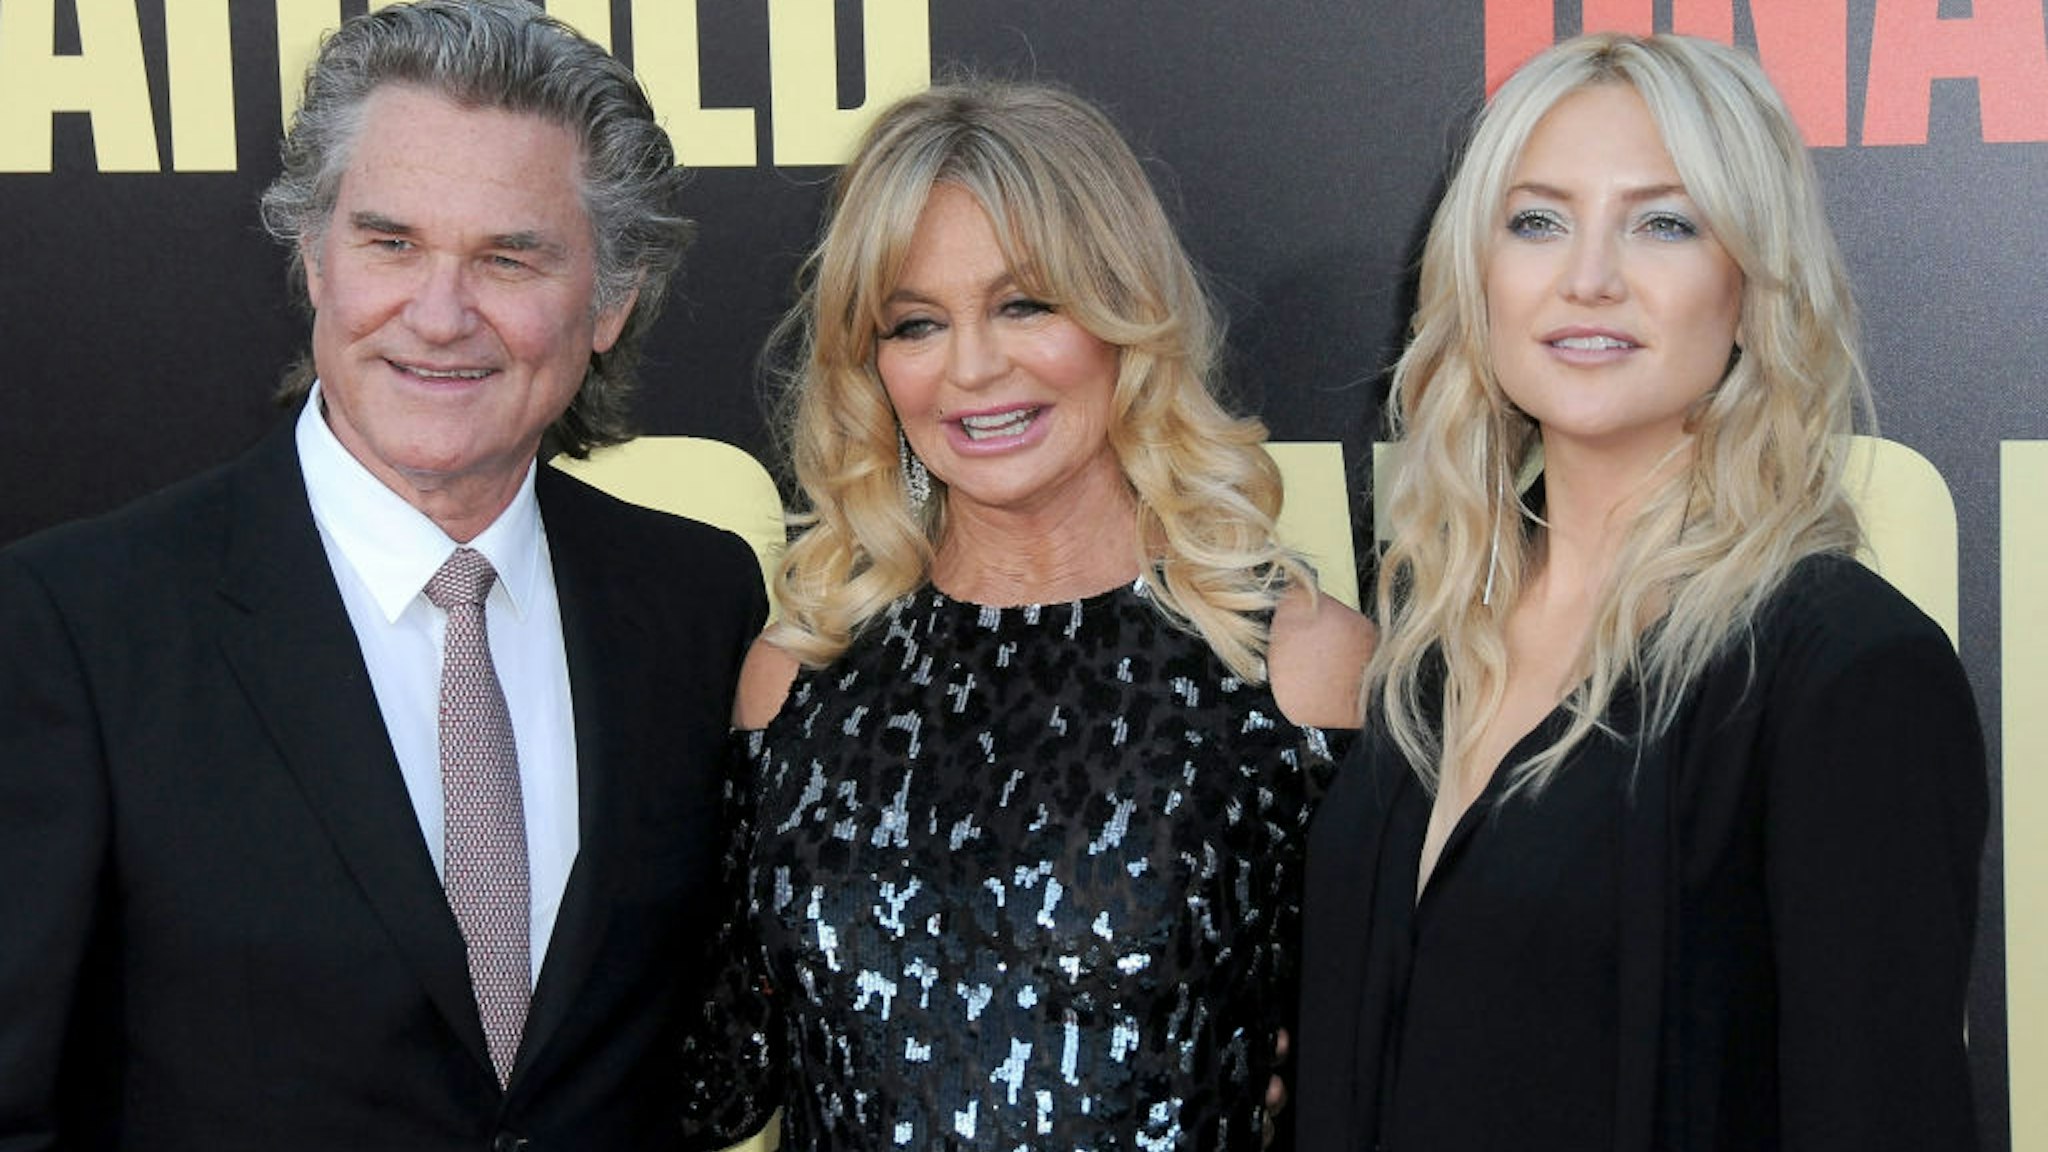 WESTWOOD, CA - MAY 10: (L-R) Actor Kurt Russell, actresses Goldie Hawn and Kate Hudson attend premiere of 20th Century Fox's' 'Snatched' at Regency Village Theatre on May 10, 2017 in Westwood, California. (Photo by Barry King/Getty Images)